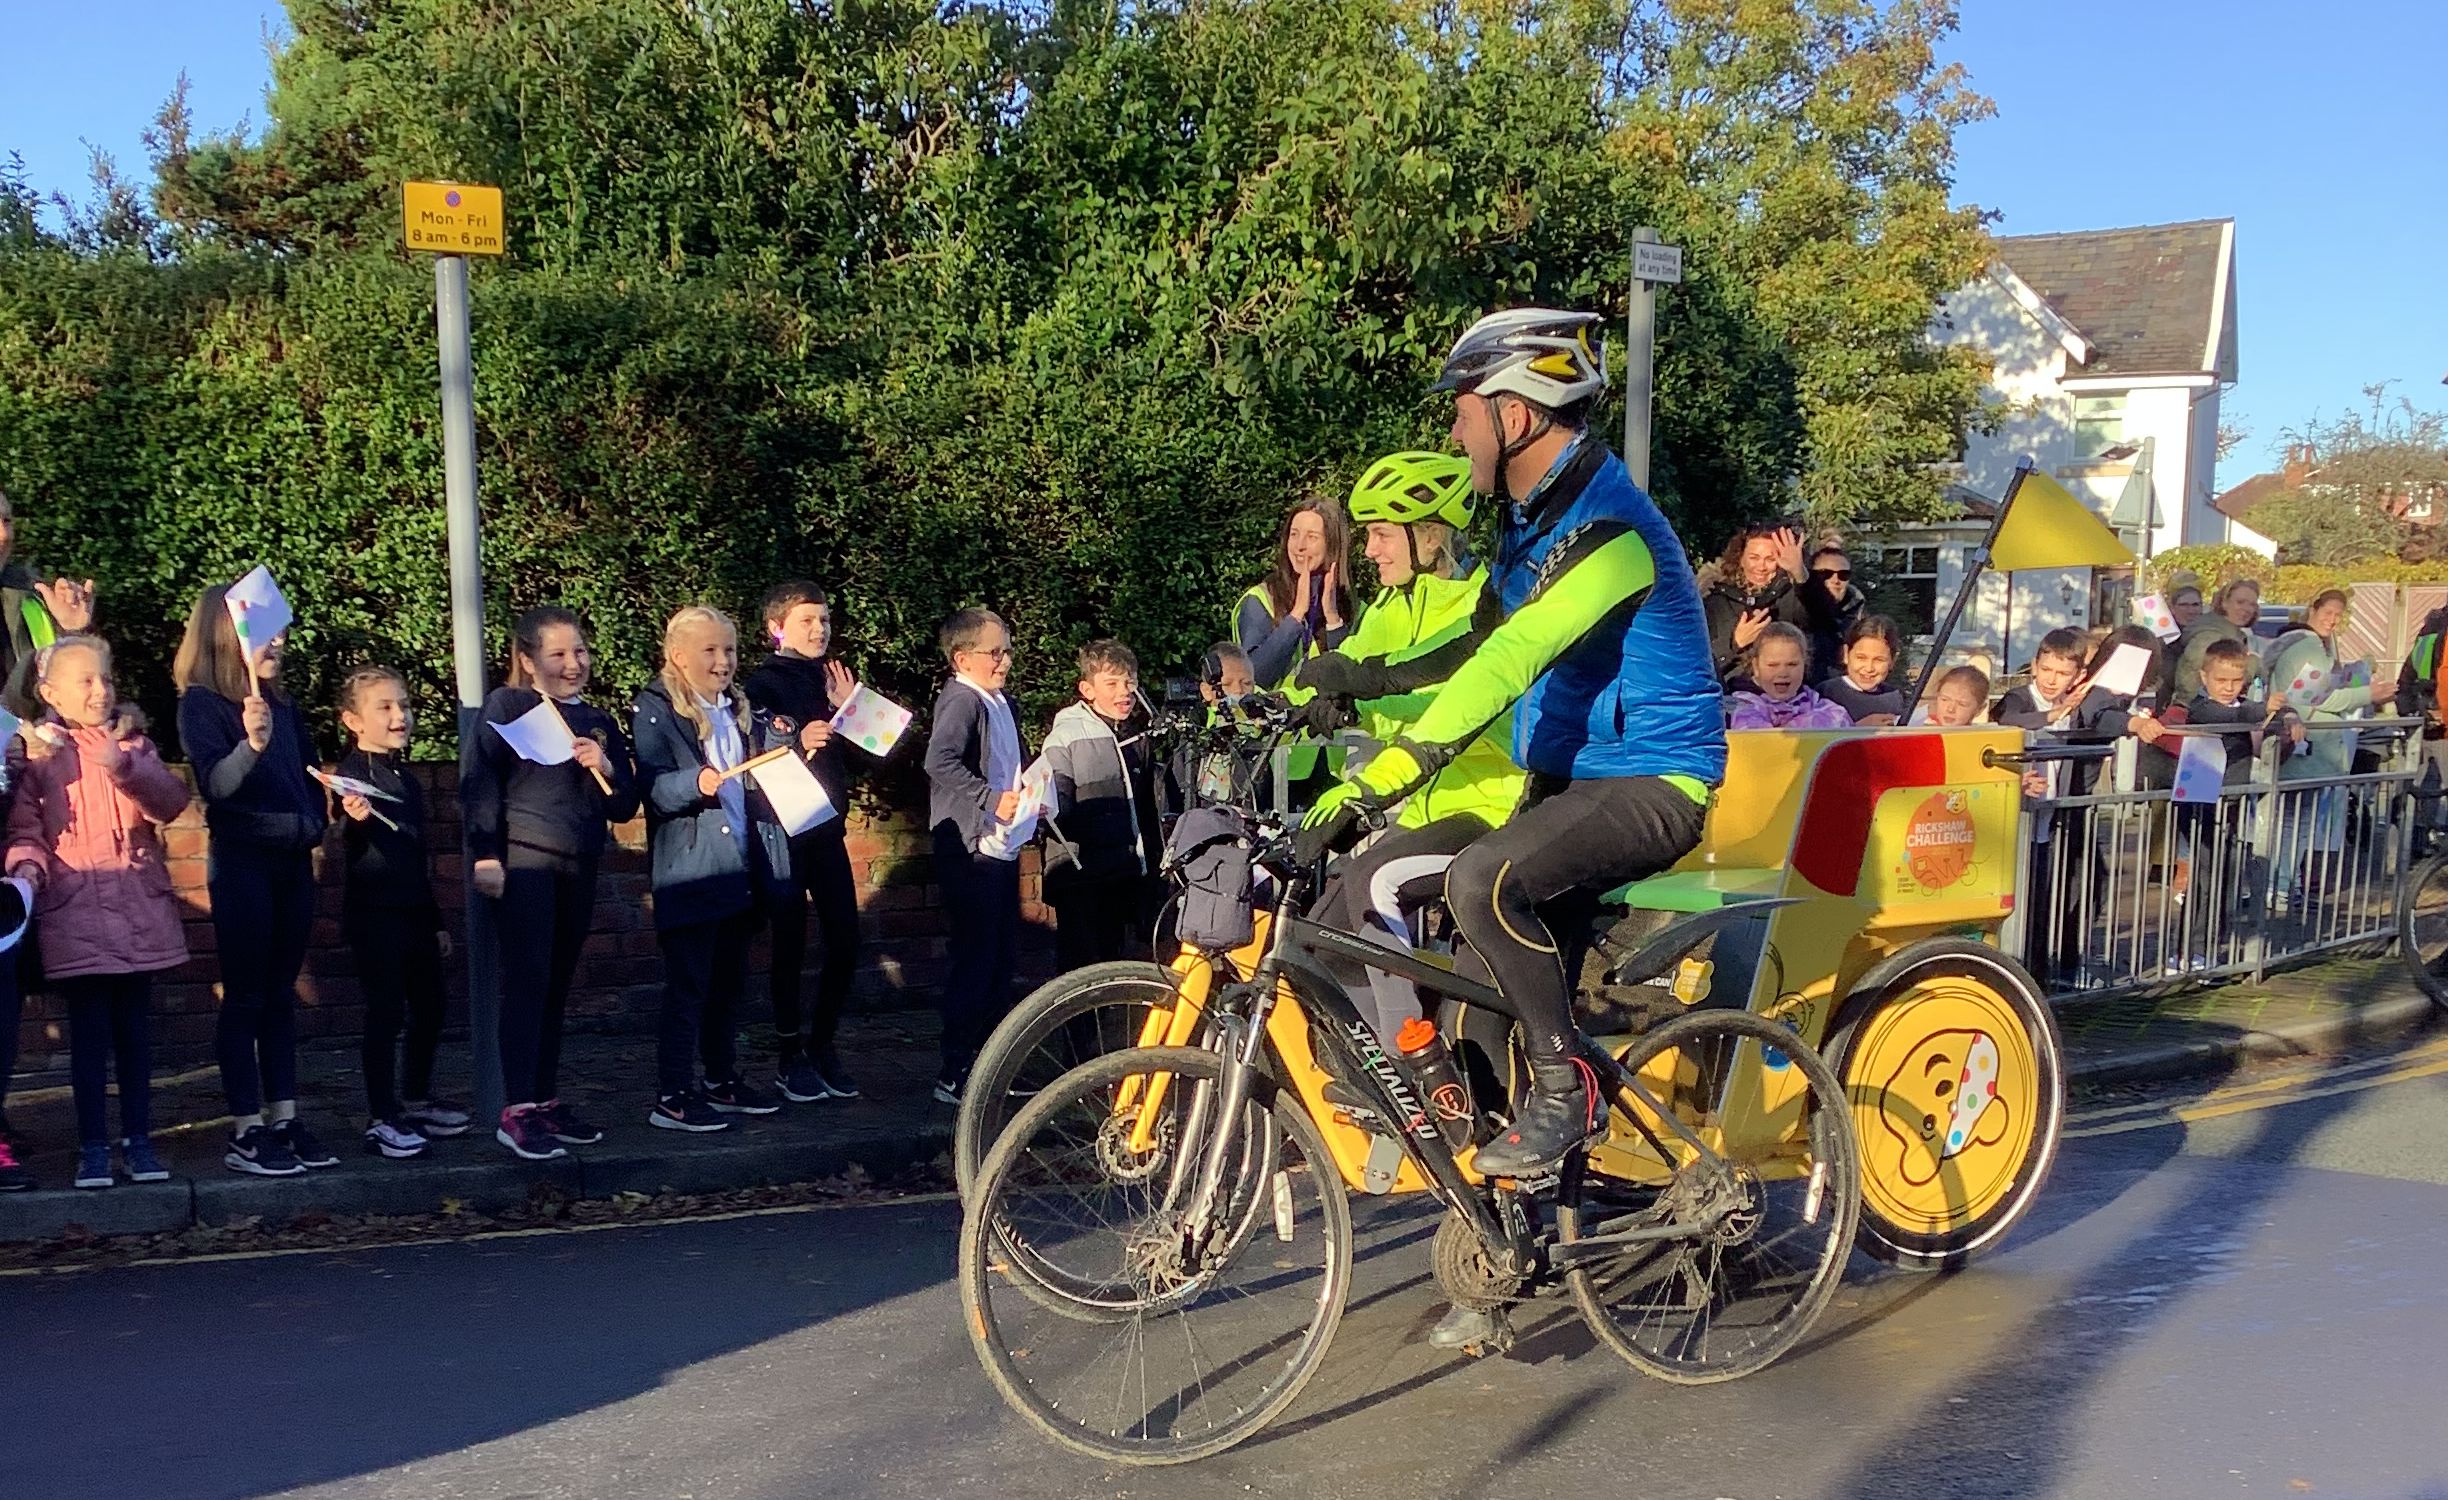 Olivia Ruston set off from Churchtown Primary School in Southport as she took part in the 2021 BBC Children In Need Rickshaw Challenge. Photo by Churchtown Primary School